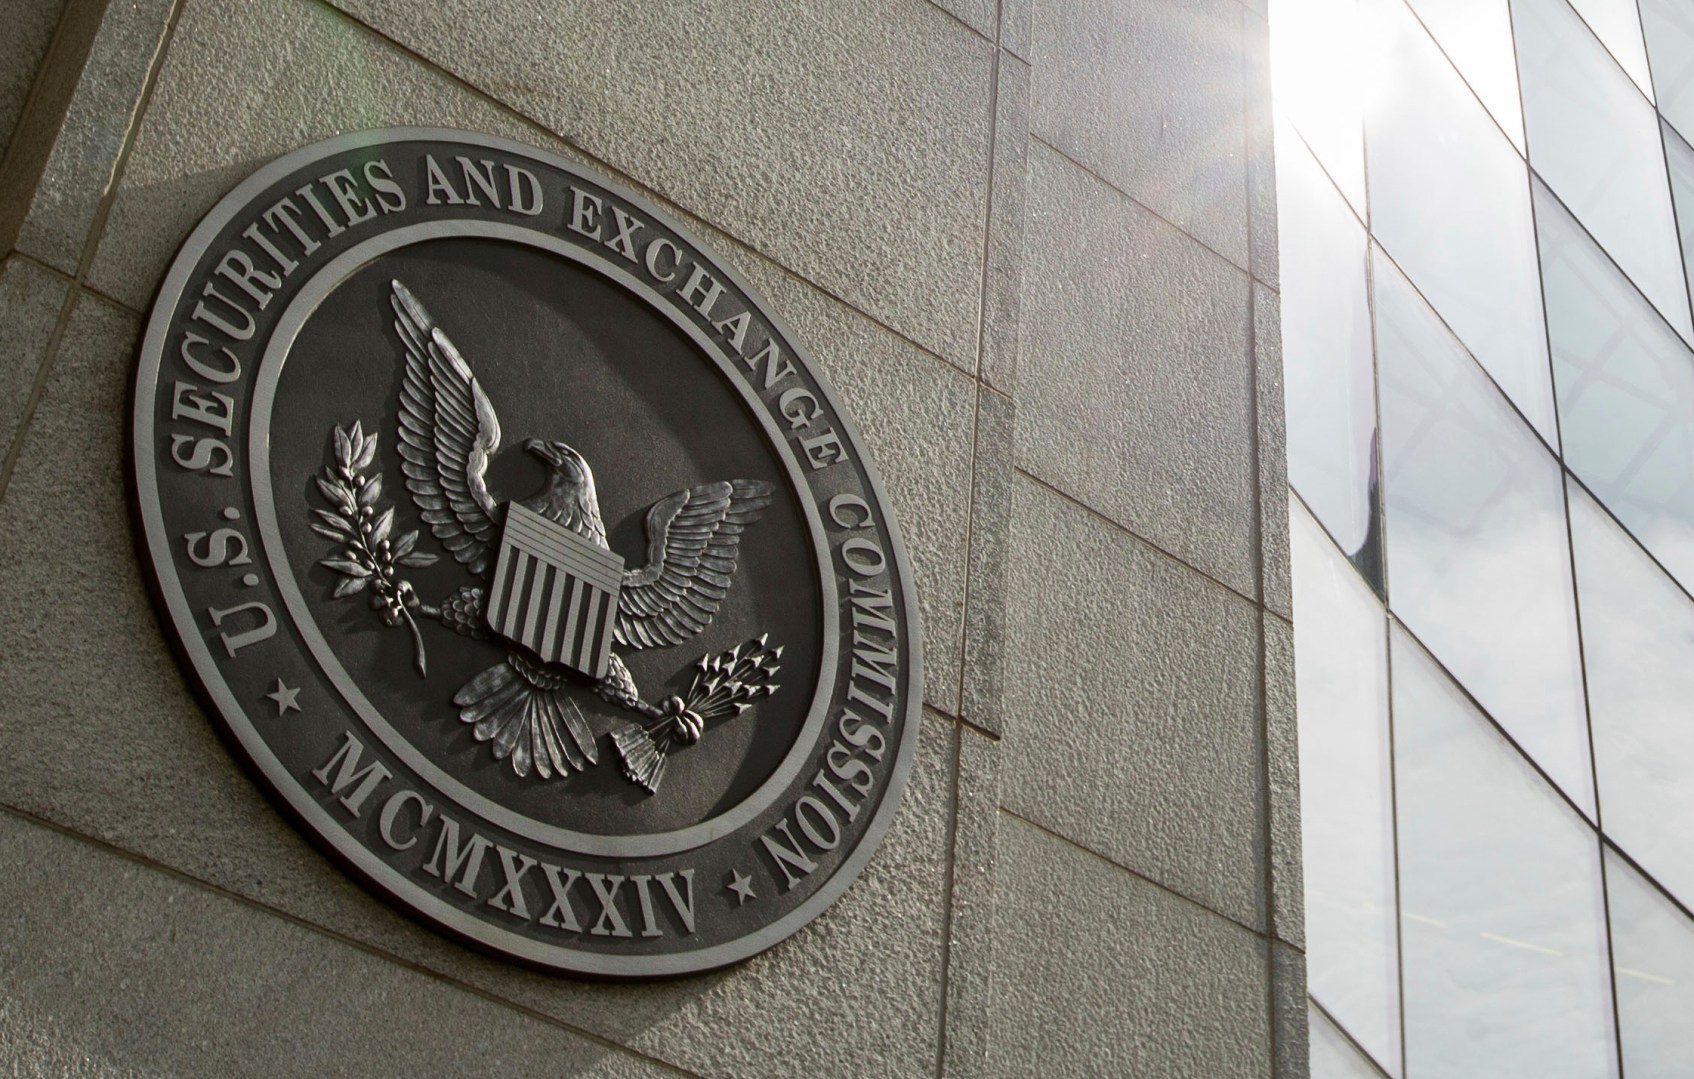 FILE - The seal of the U.S. Securities and Exchange Commission at SEC headquarters in Washington is seen, June 19, 2015. A bipartisan group of more than a two dozen lawmakers are asking the SEC to put the brakes on an initial public offering by Chinese fast fashion retailer Shein until it verifies it does not use forced labor from the country’s predominantly Muslim Uyghur population. (AP Photo/Andrew Harnik, File)